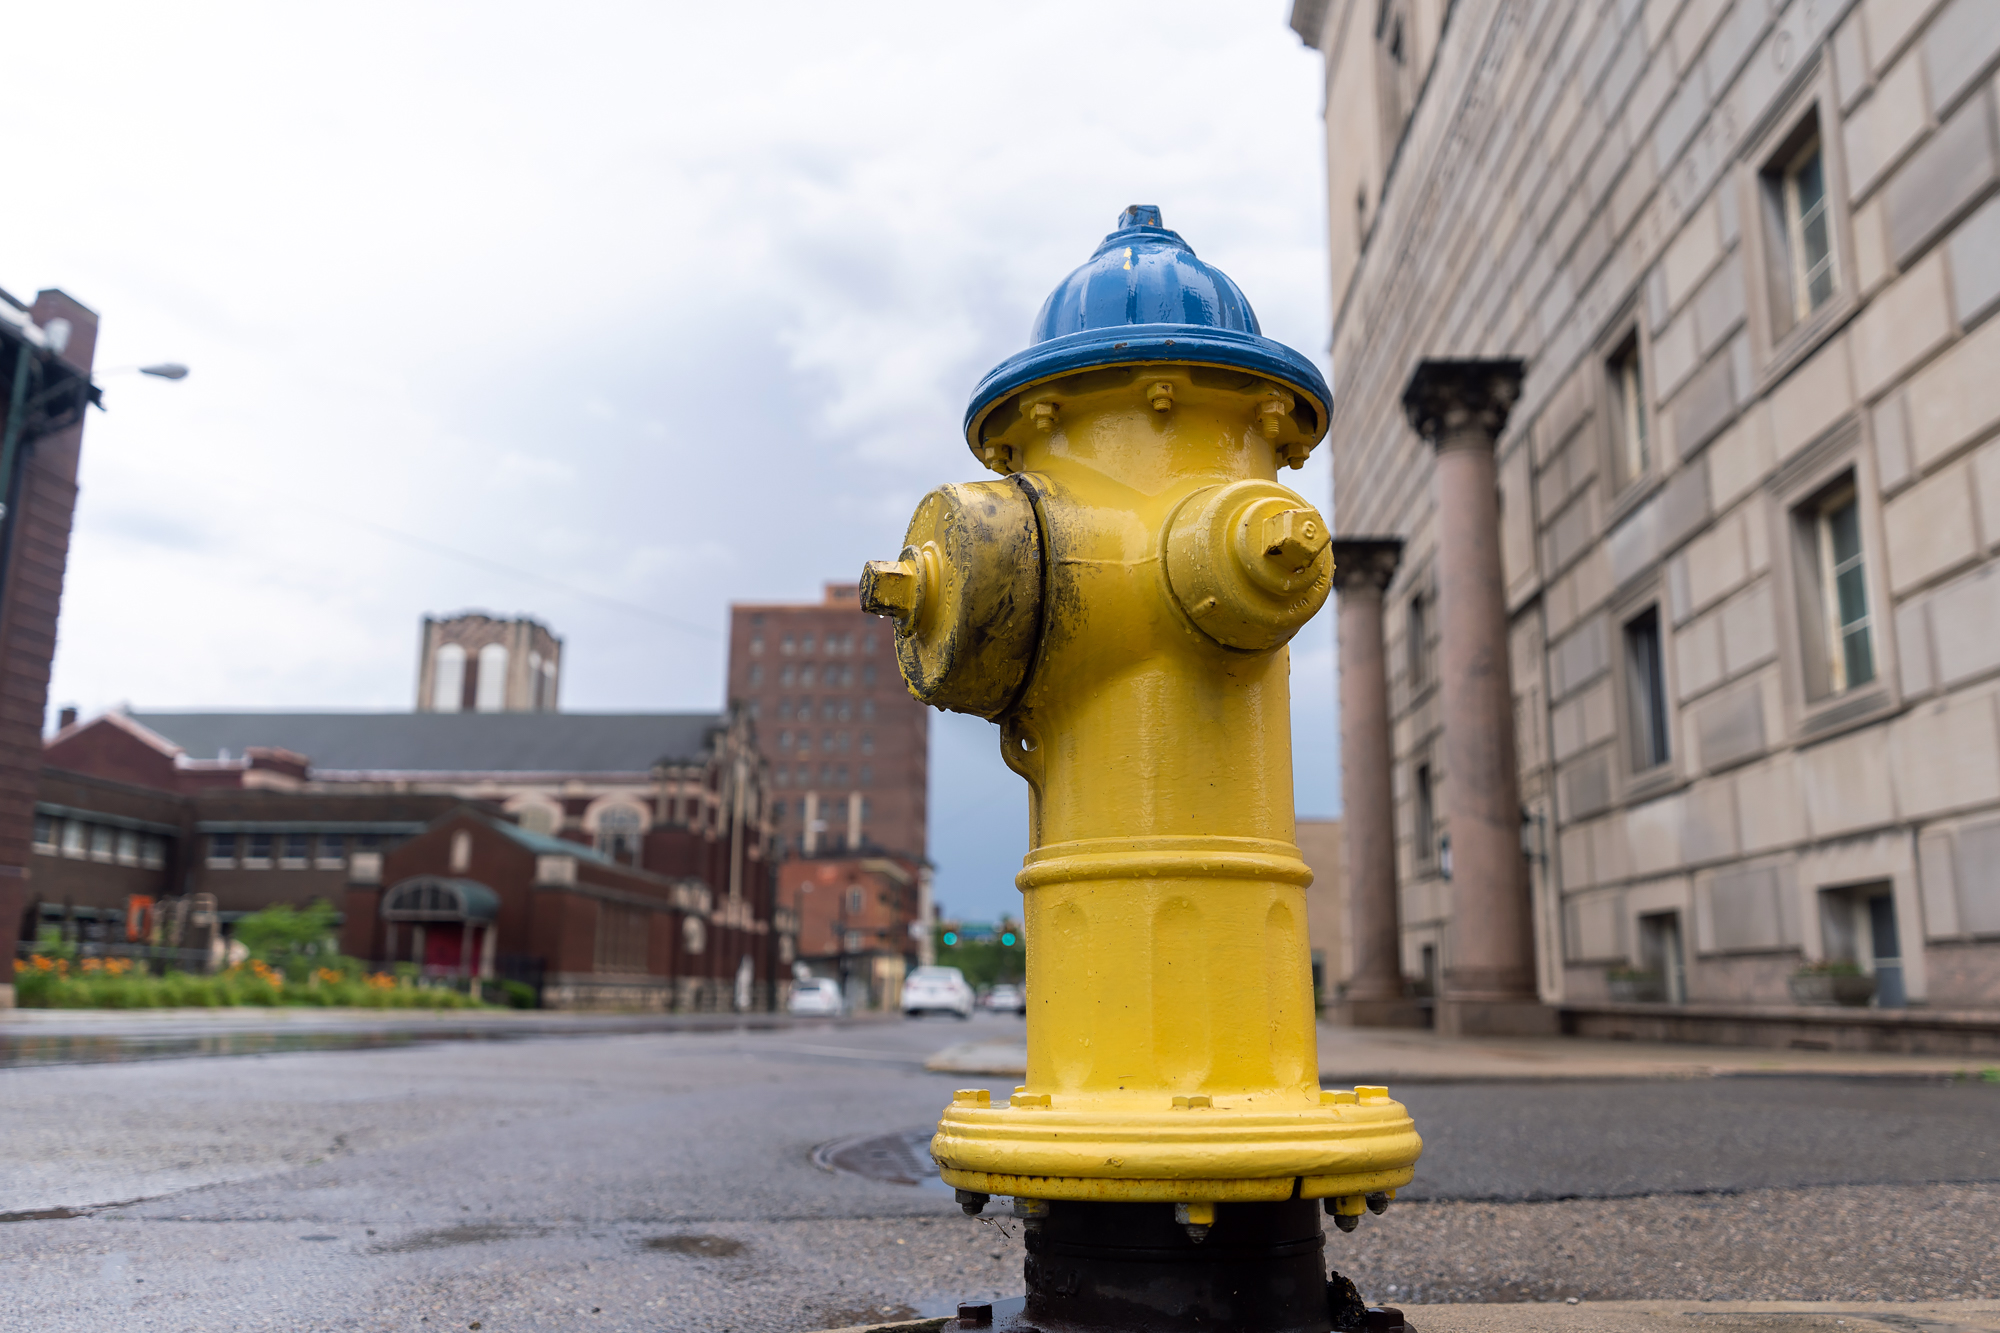 Yellow and blue fire hydrant Springfield Ohio